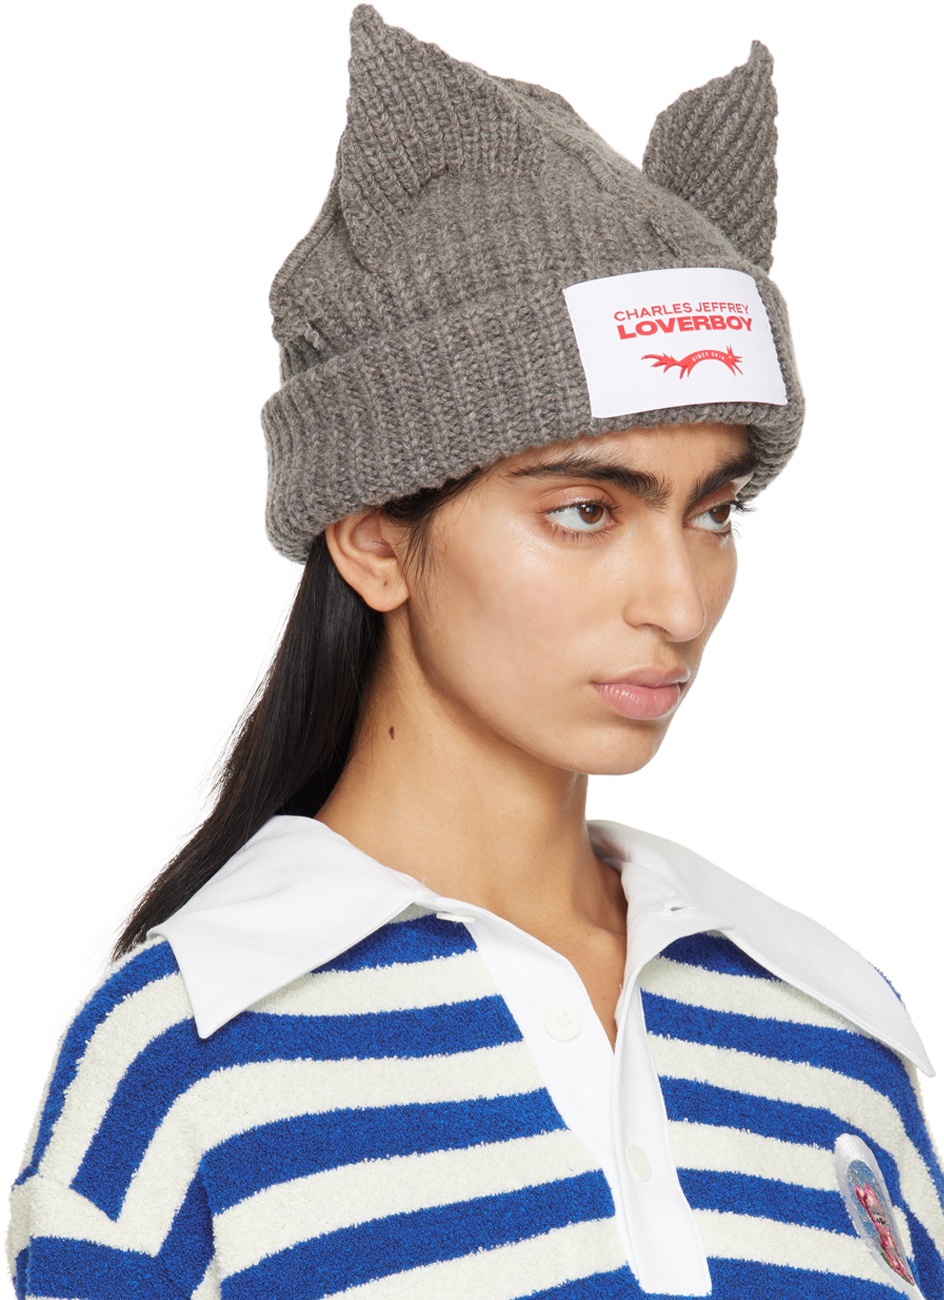 Charles Jeffrey LOVERBOY SSENSE Exclusive Gray Chunky Ears Beanie